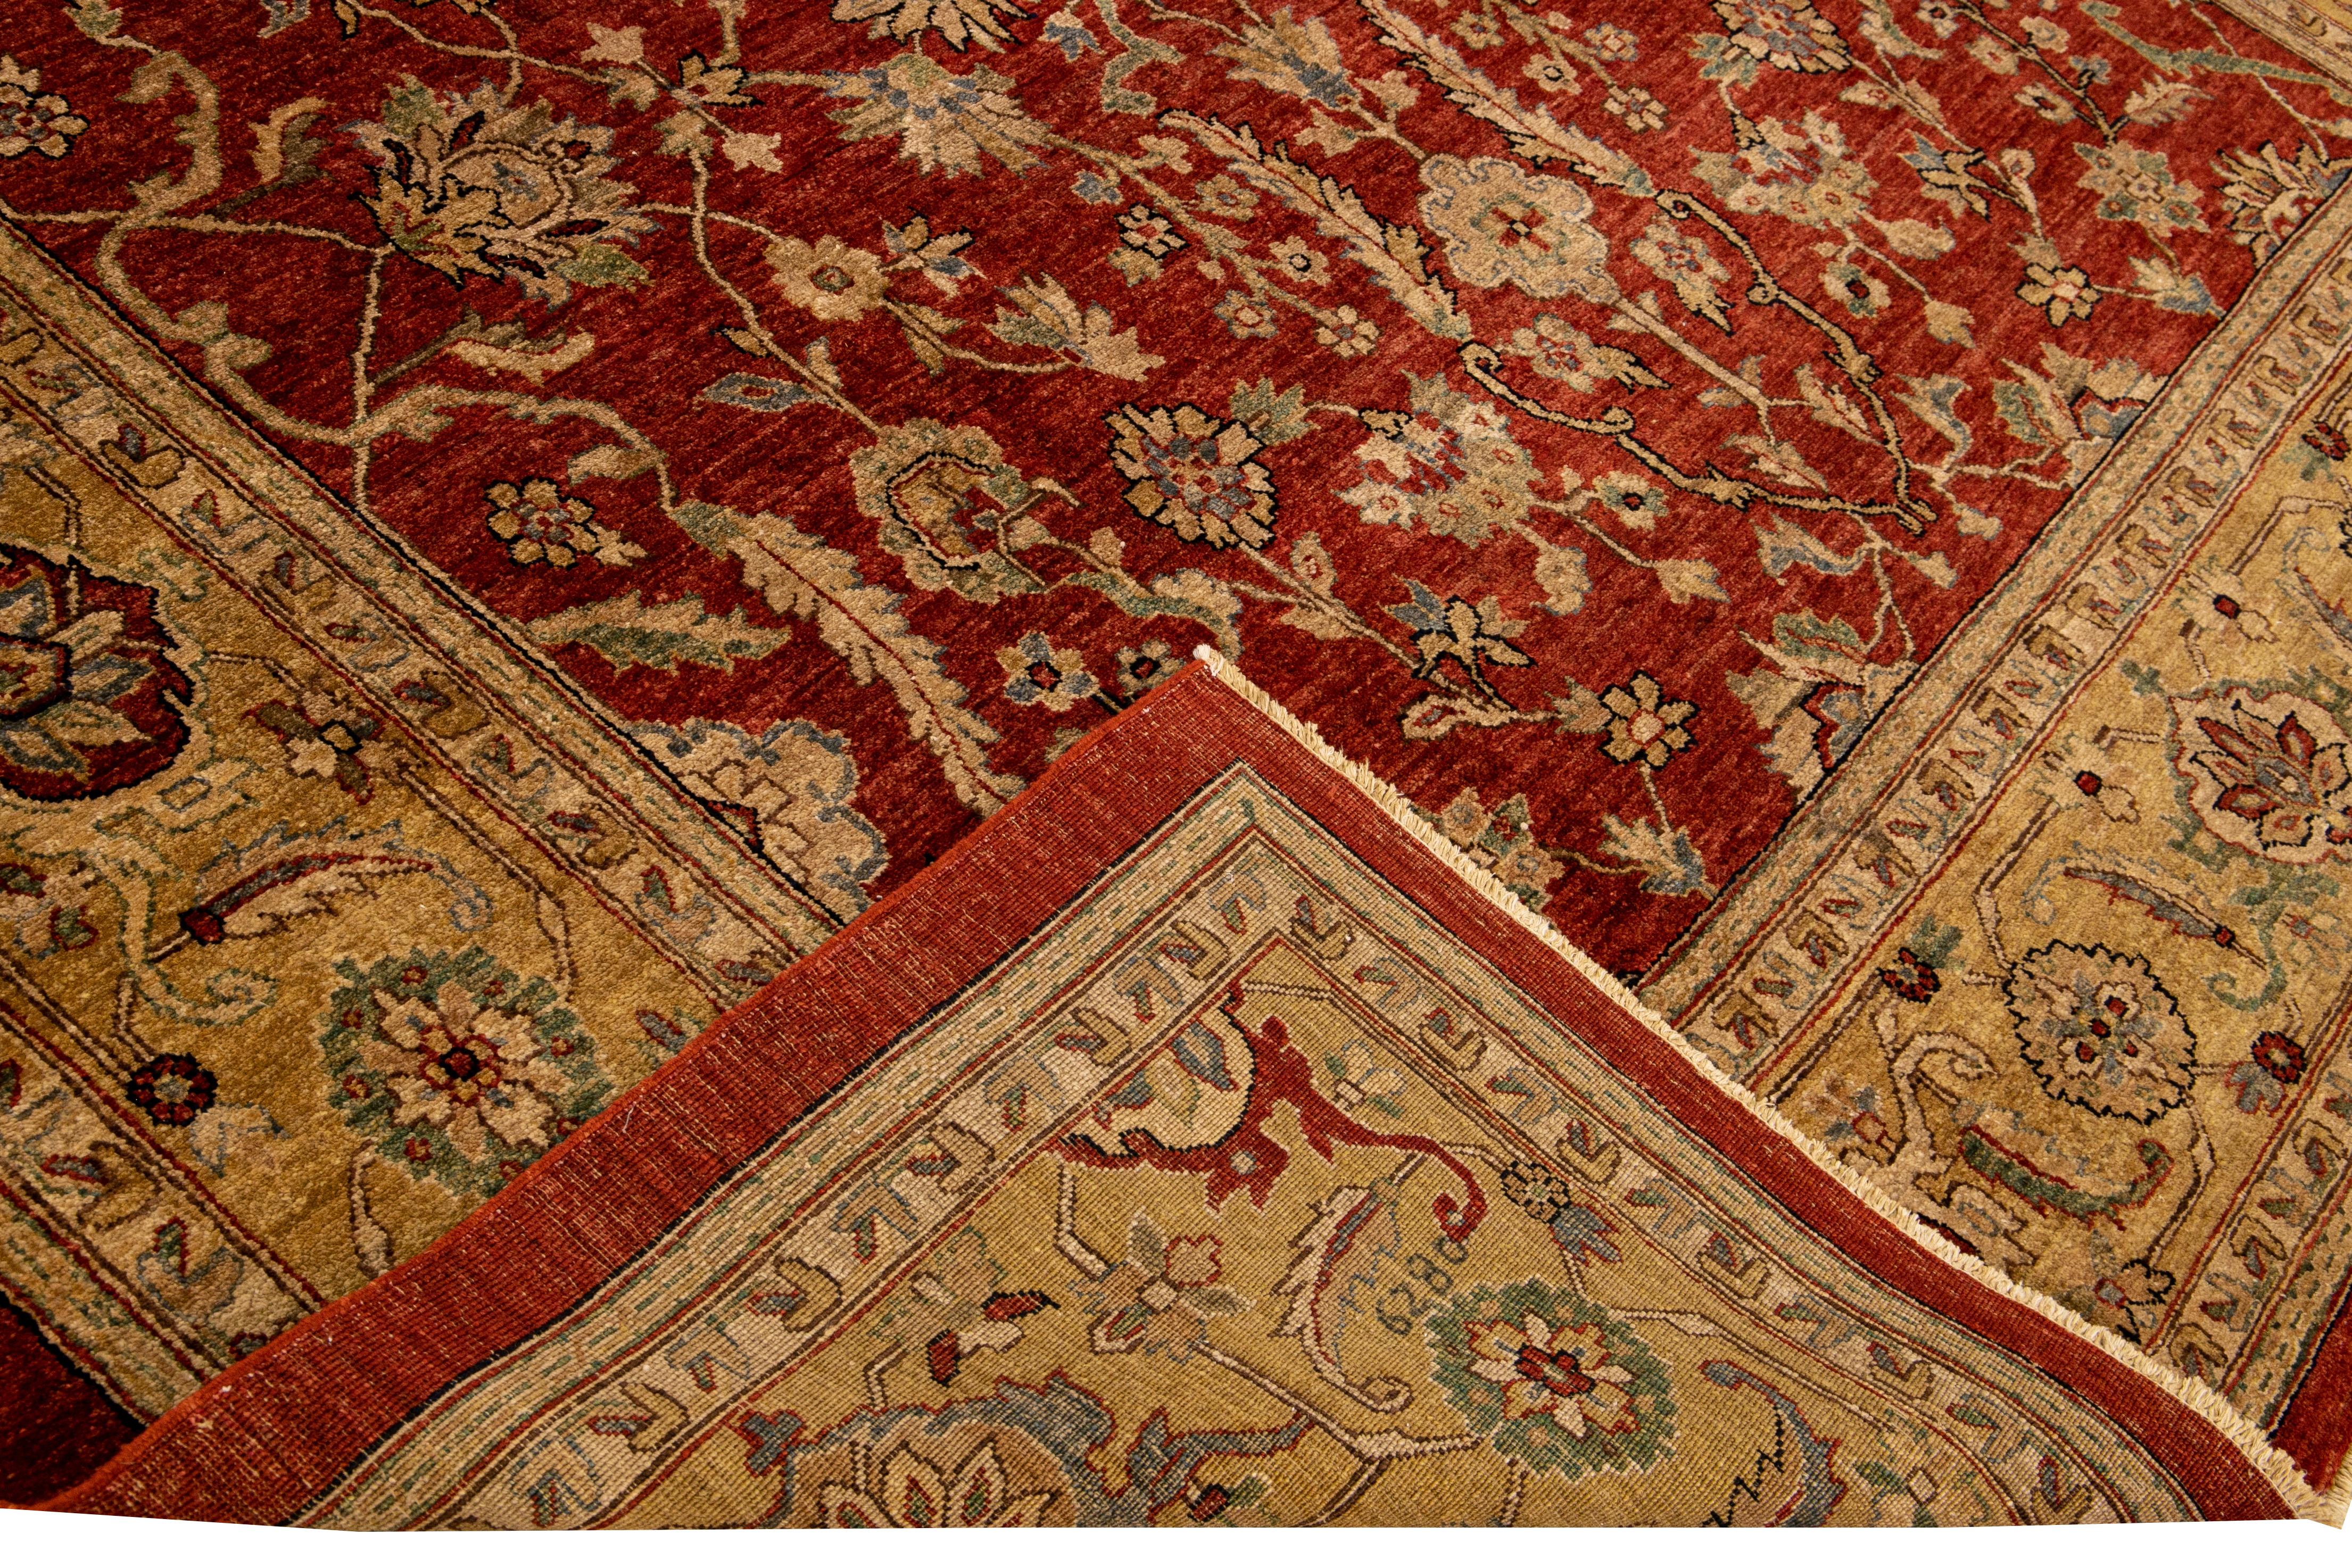 Beautiful Paki Peshawar hand-knotted wool rug with the red field. This modern rug has a tan, blue, and green accents in a gorgeous all-over Classic vine scroll and a palmettes motif.

This rug measures: 9' x 11'6